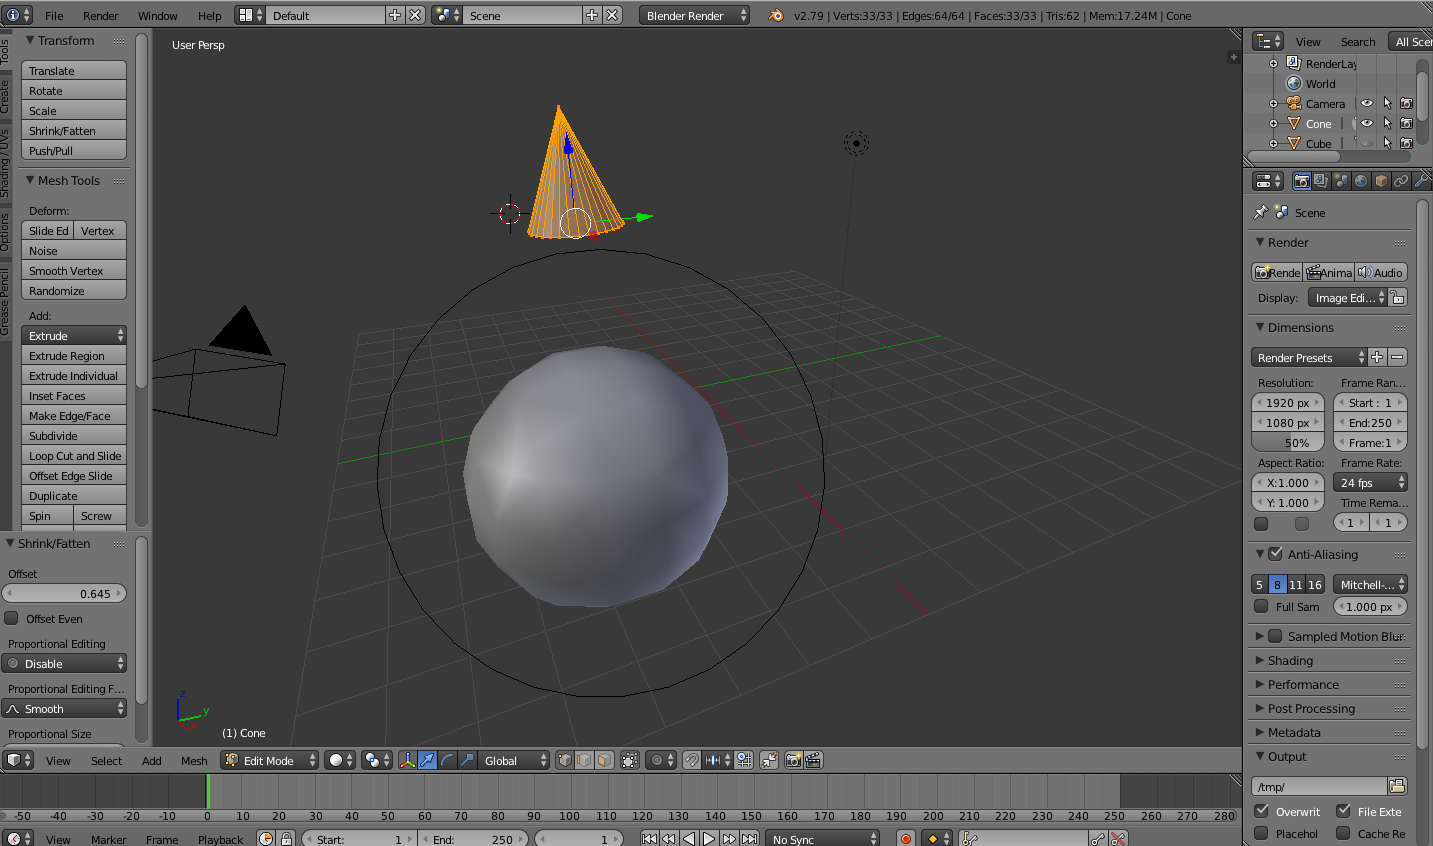 Spehre and cone with Blender